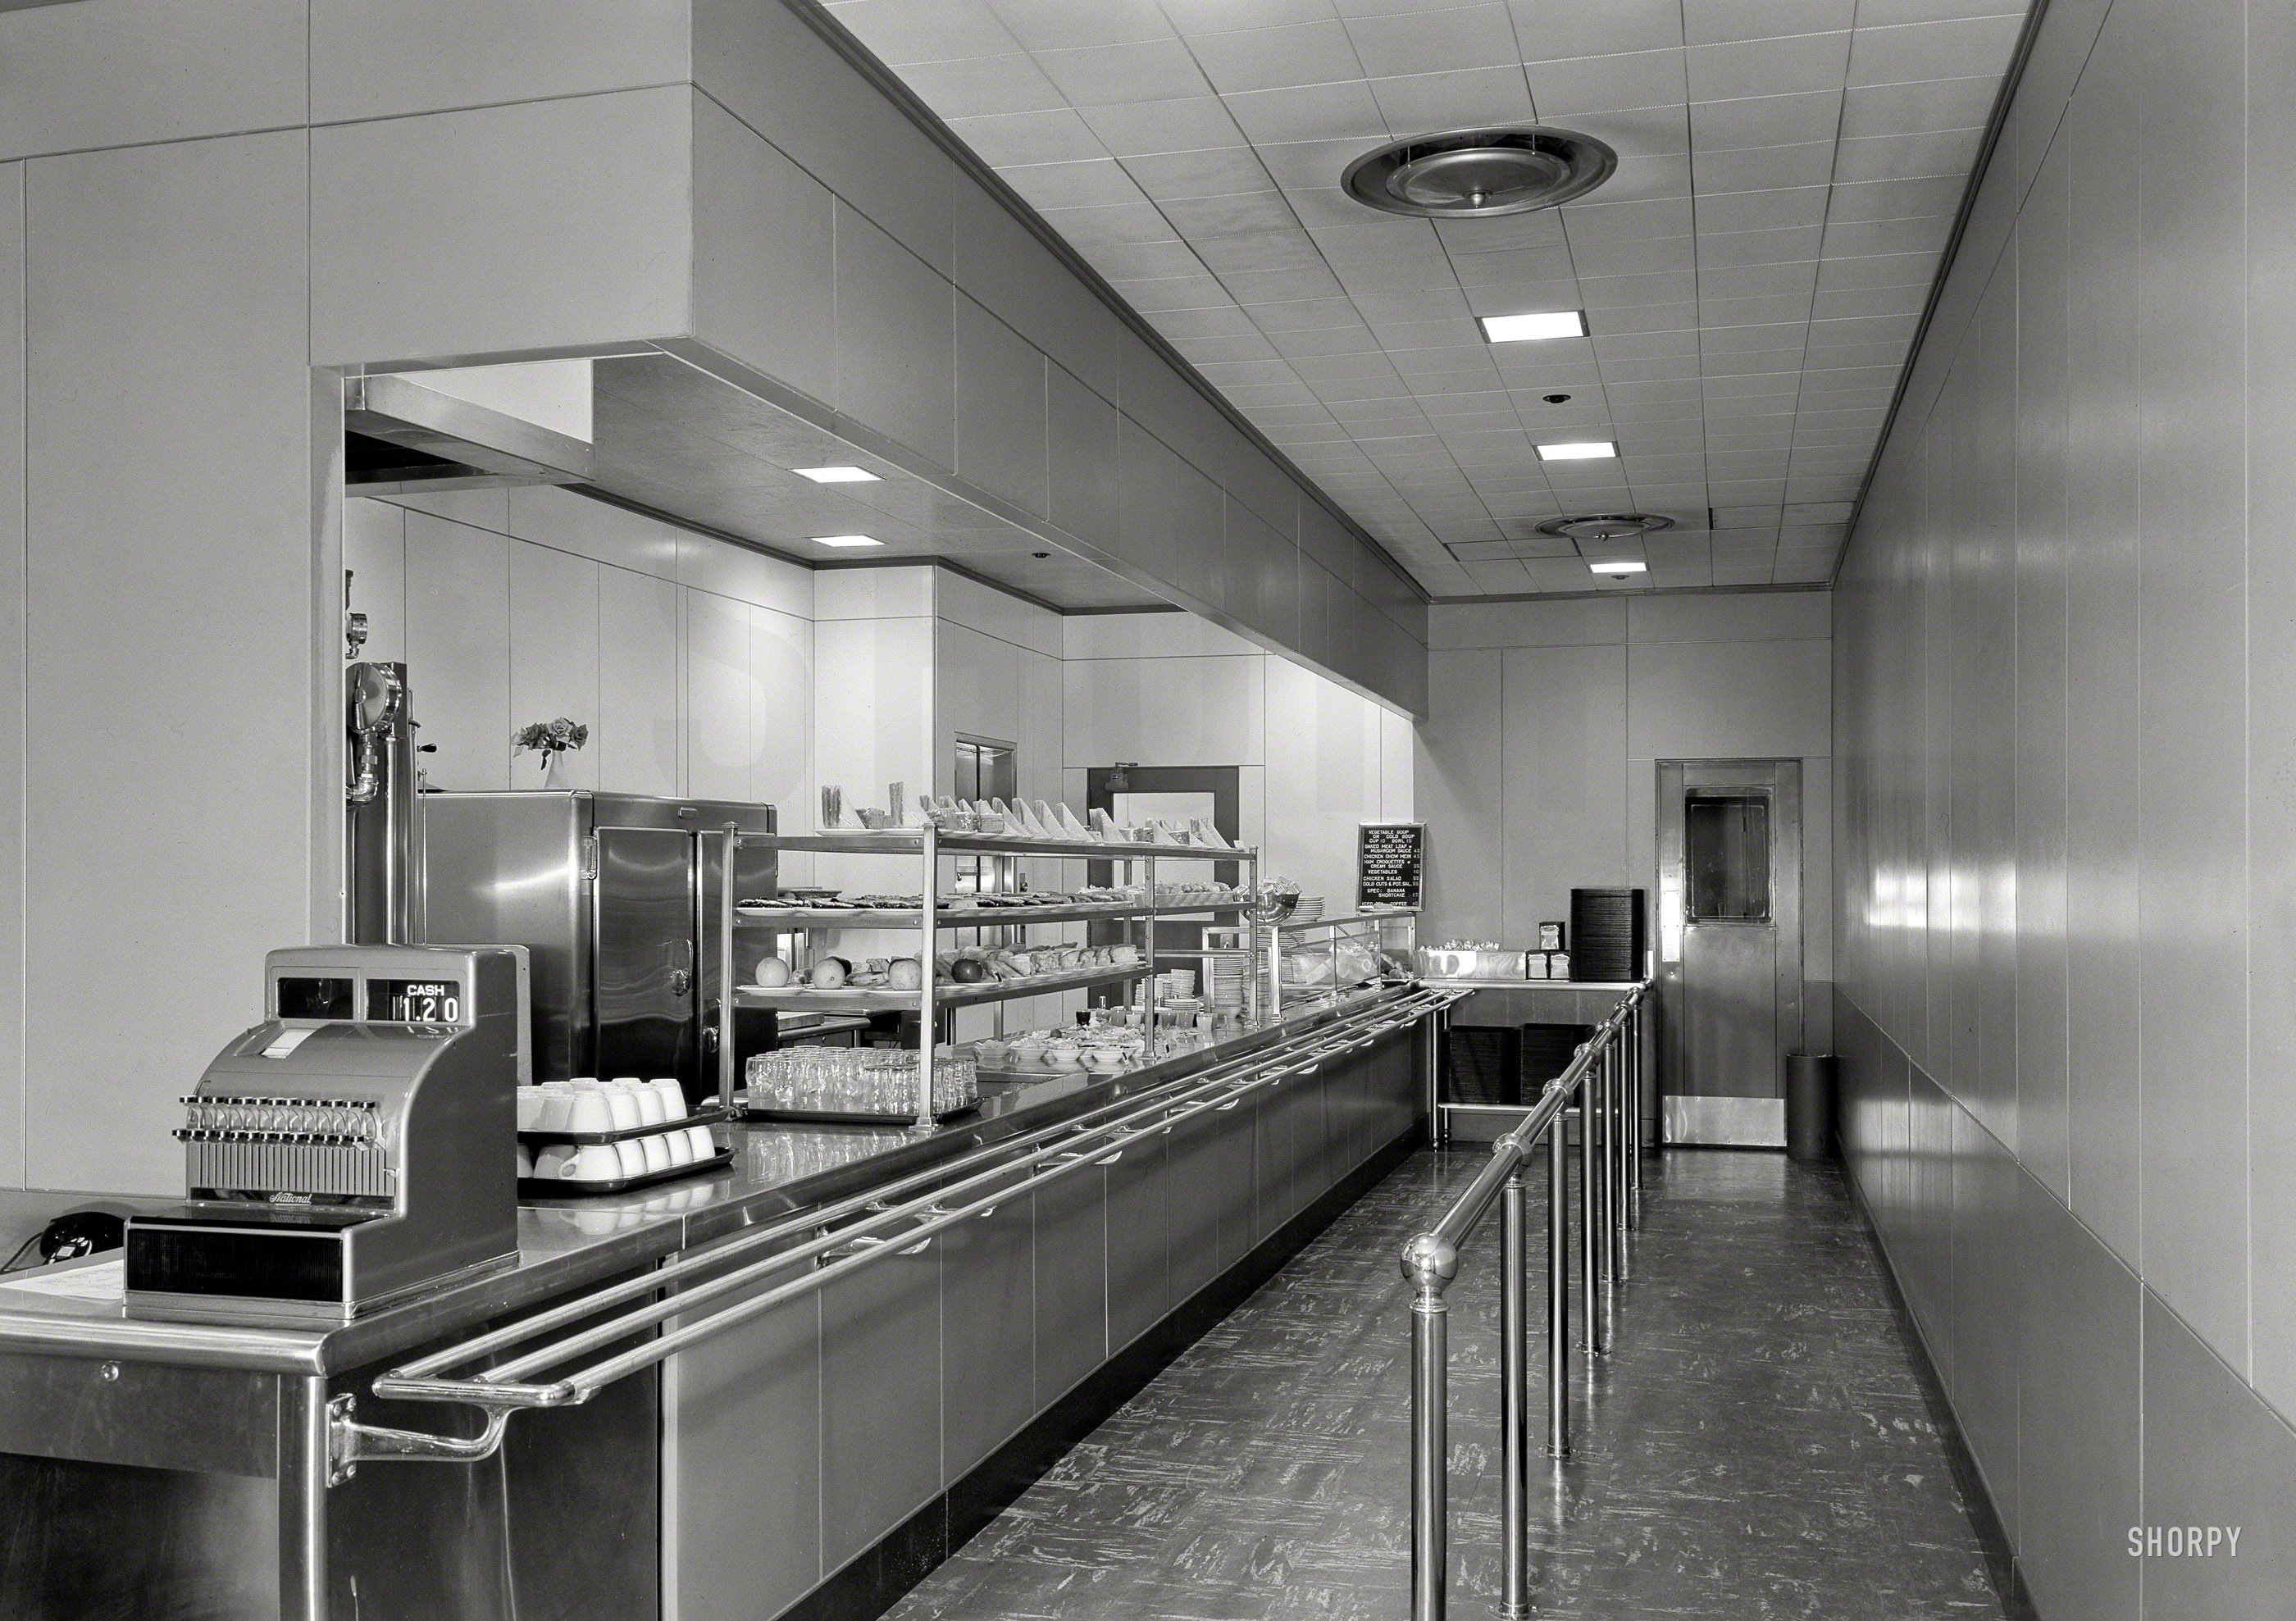 July 6, 1949. "Johns-Manville Research Laboratory, Finderne, N.J. Cafeteria II. Shreve, Lamb & Harmon, architect." Gottscho-Schleisner photo. View full size.